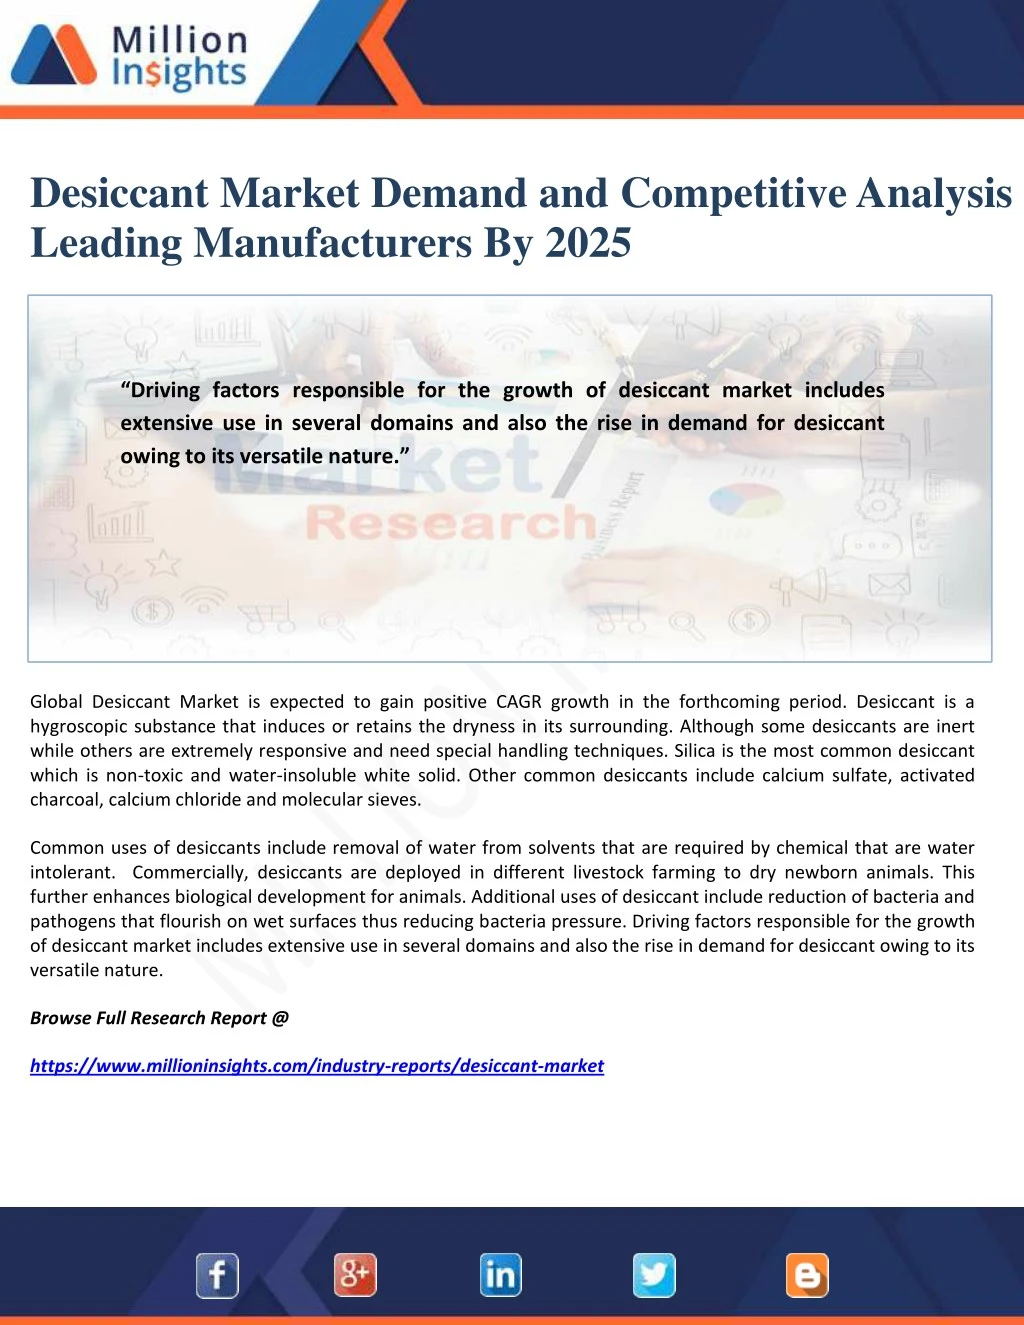 desiccant market demand and competitive analysis